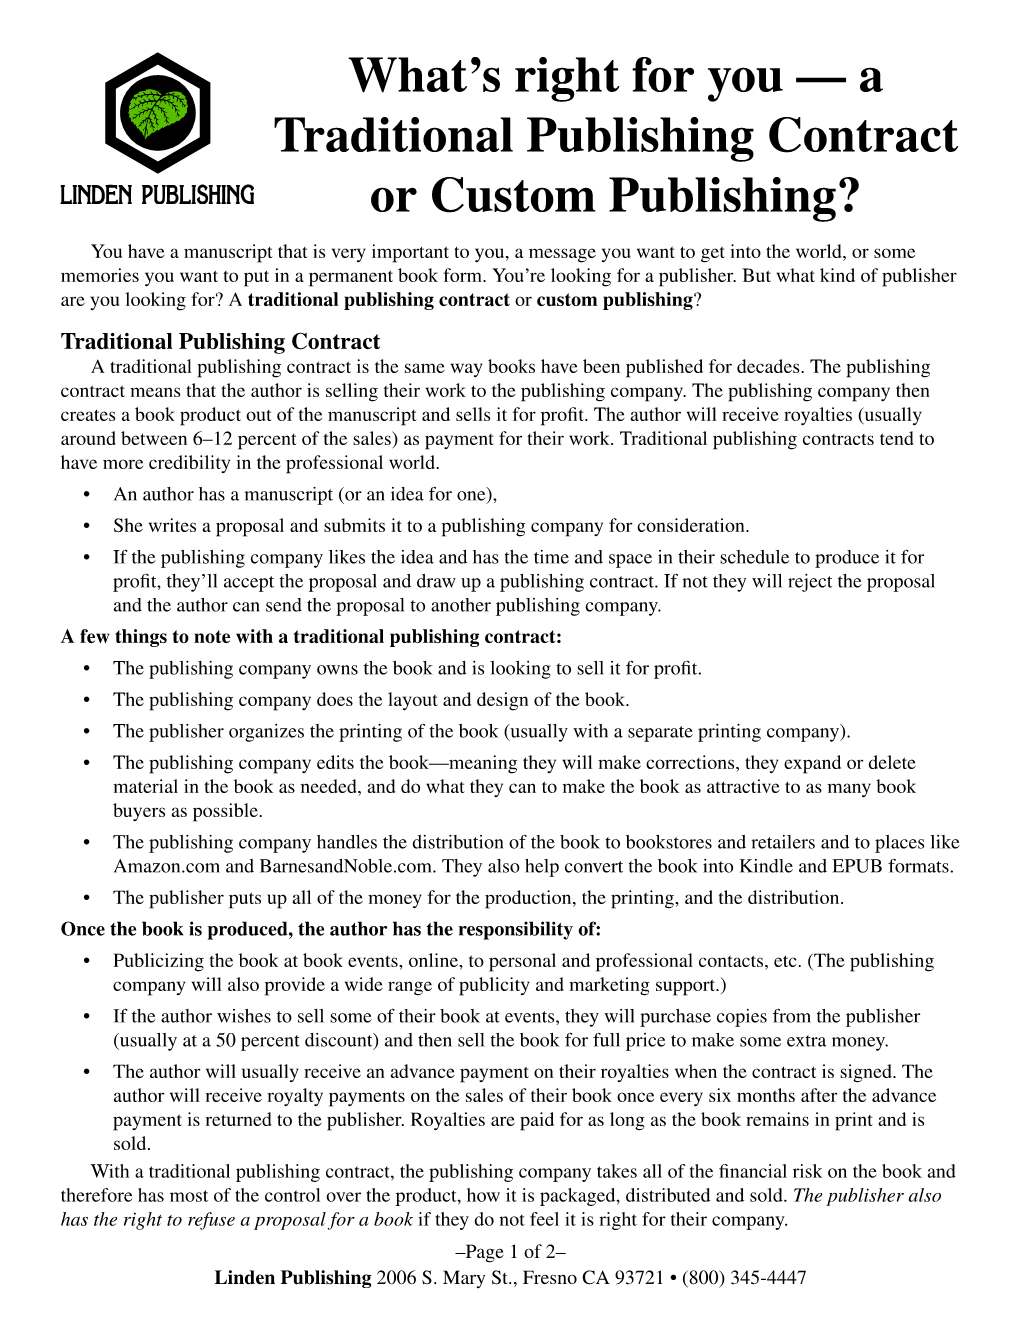 What's Right for You — a Traditional Publishing